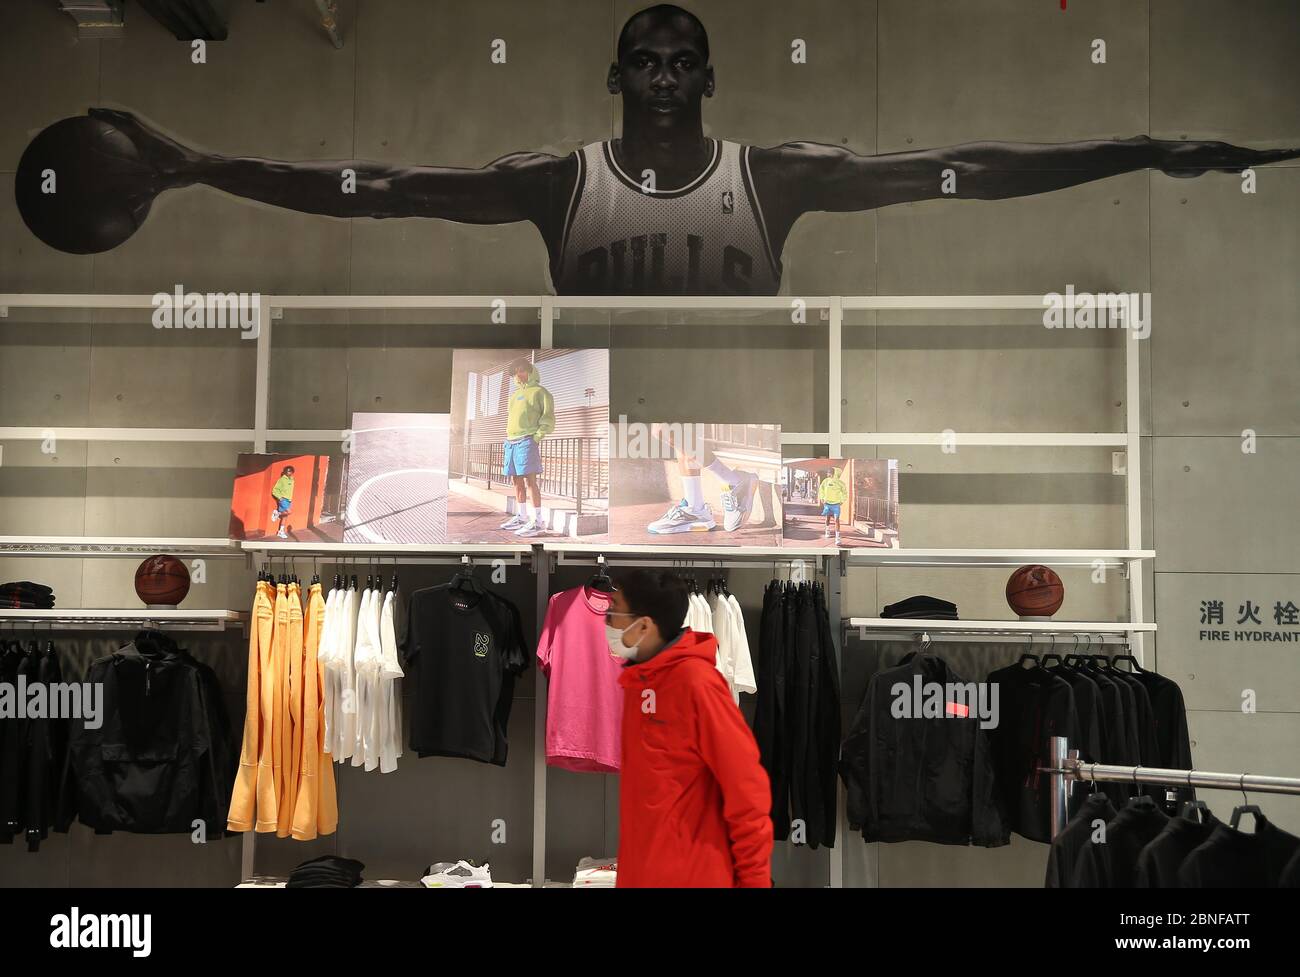 The logo of Air Jordan, a brand basketball shoes, athletic, casual, and style produced by Nike, is seen at one its chain stores, Shenya Stock Photo - Alamy